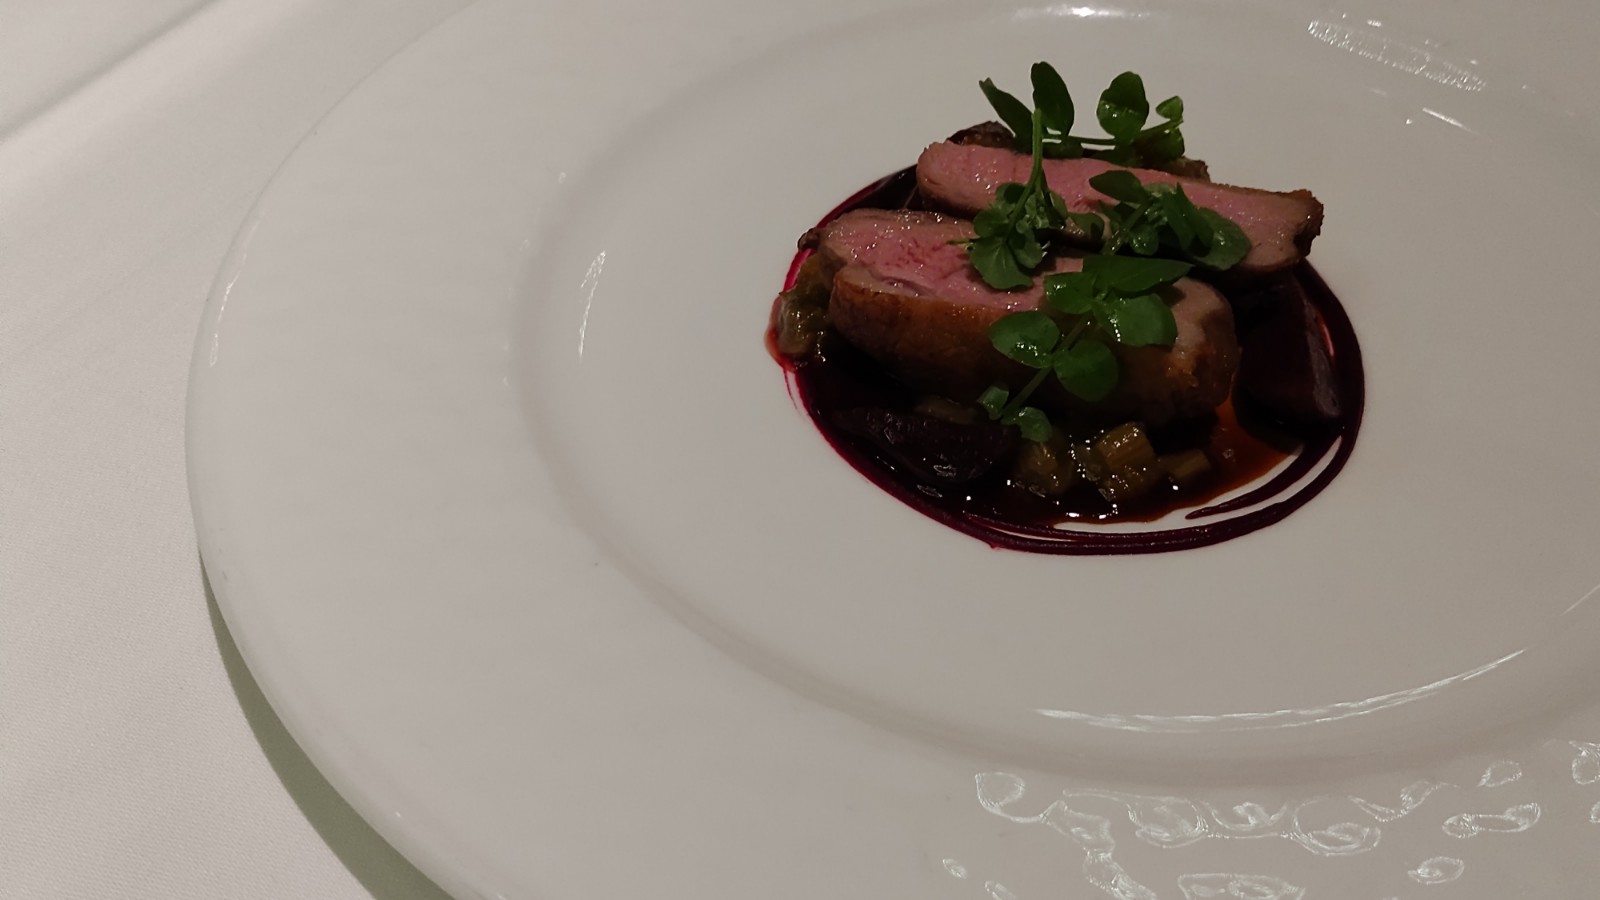 PICTURE OF THE PAN ROASTED DUCK BREAST
Oprah Farms Red Beets, Stewed Green Kula Rhubarb, Watercress and Balsamic Li hing Jus